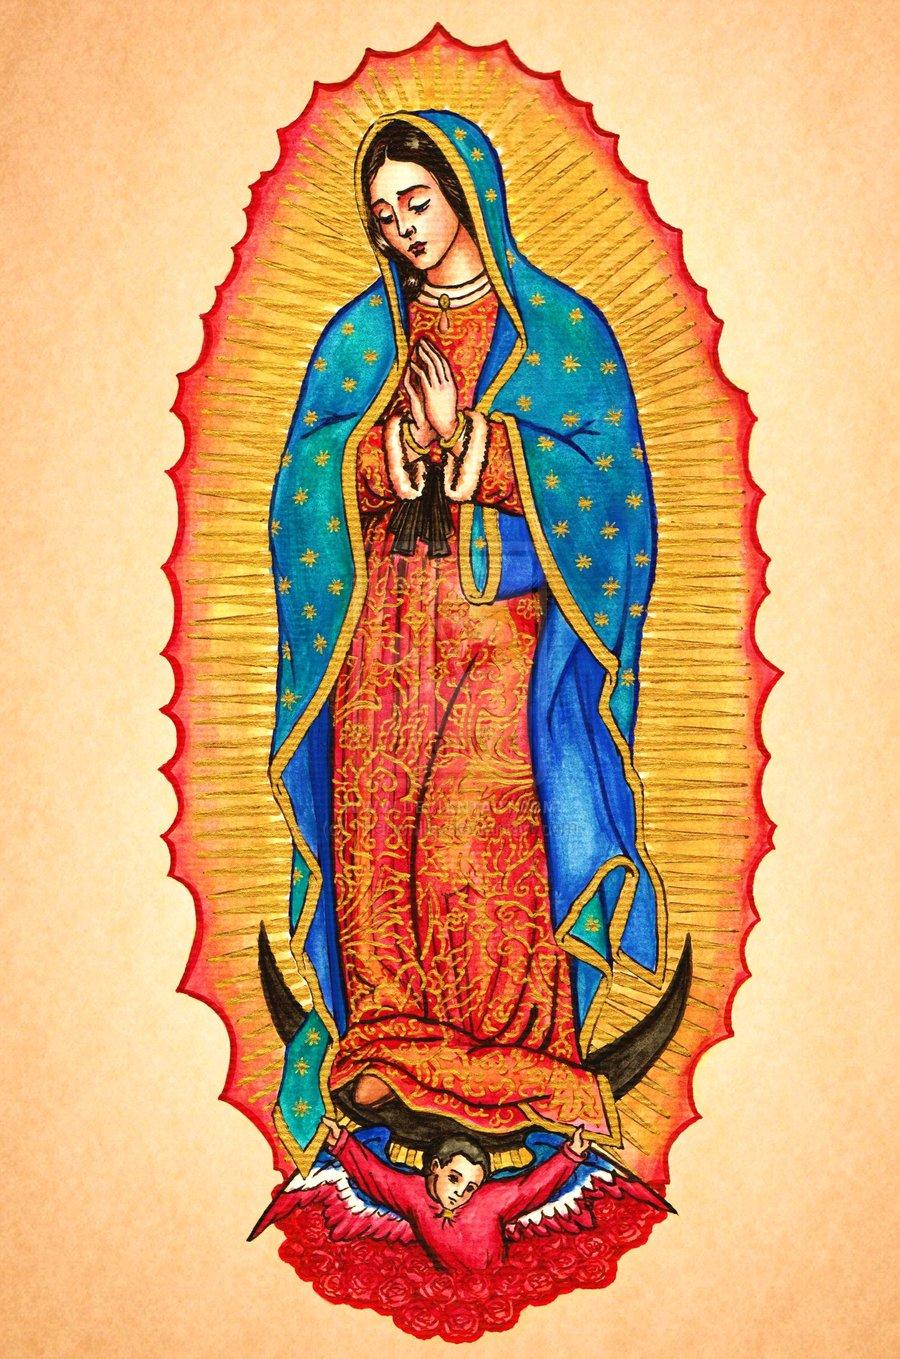 Free download Mexican Virgin Mary Wallpaper The virgin